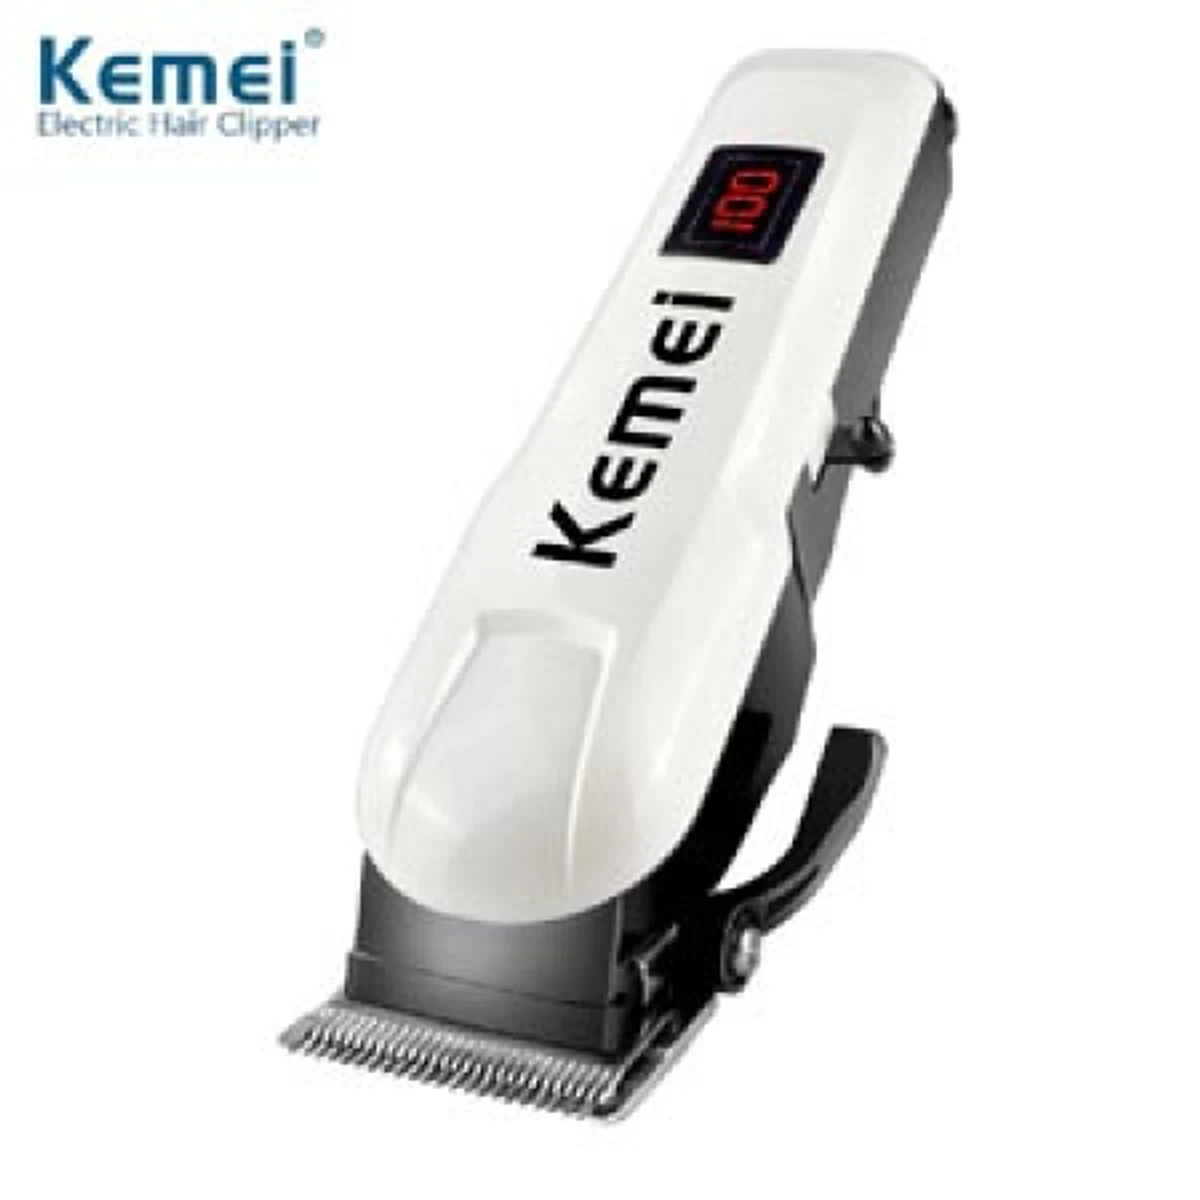 Kemei Km-809 A Rechargeable Electric Trimmer